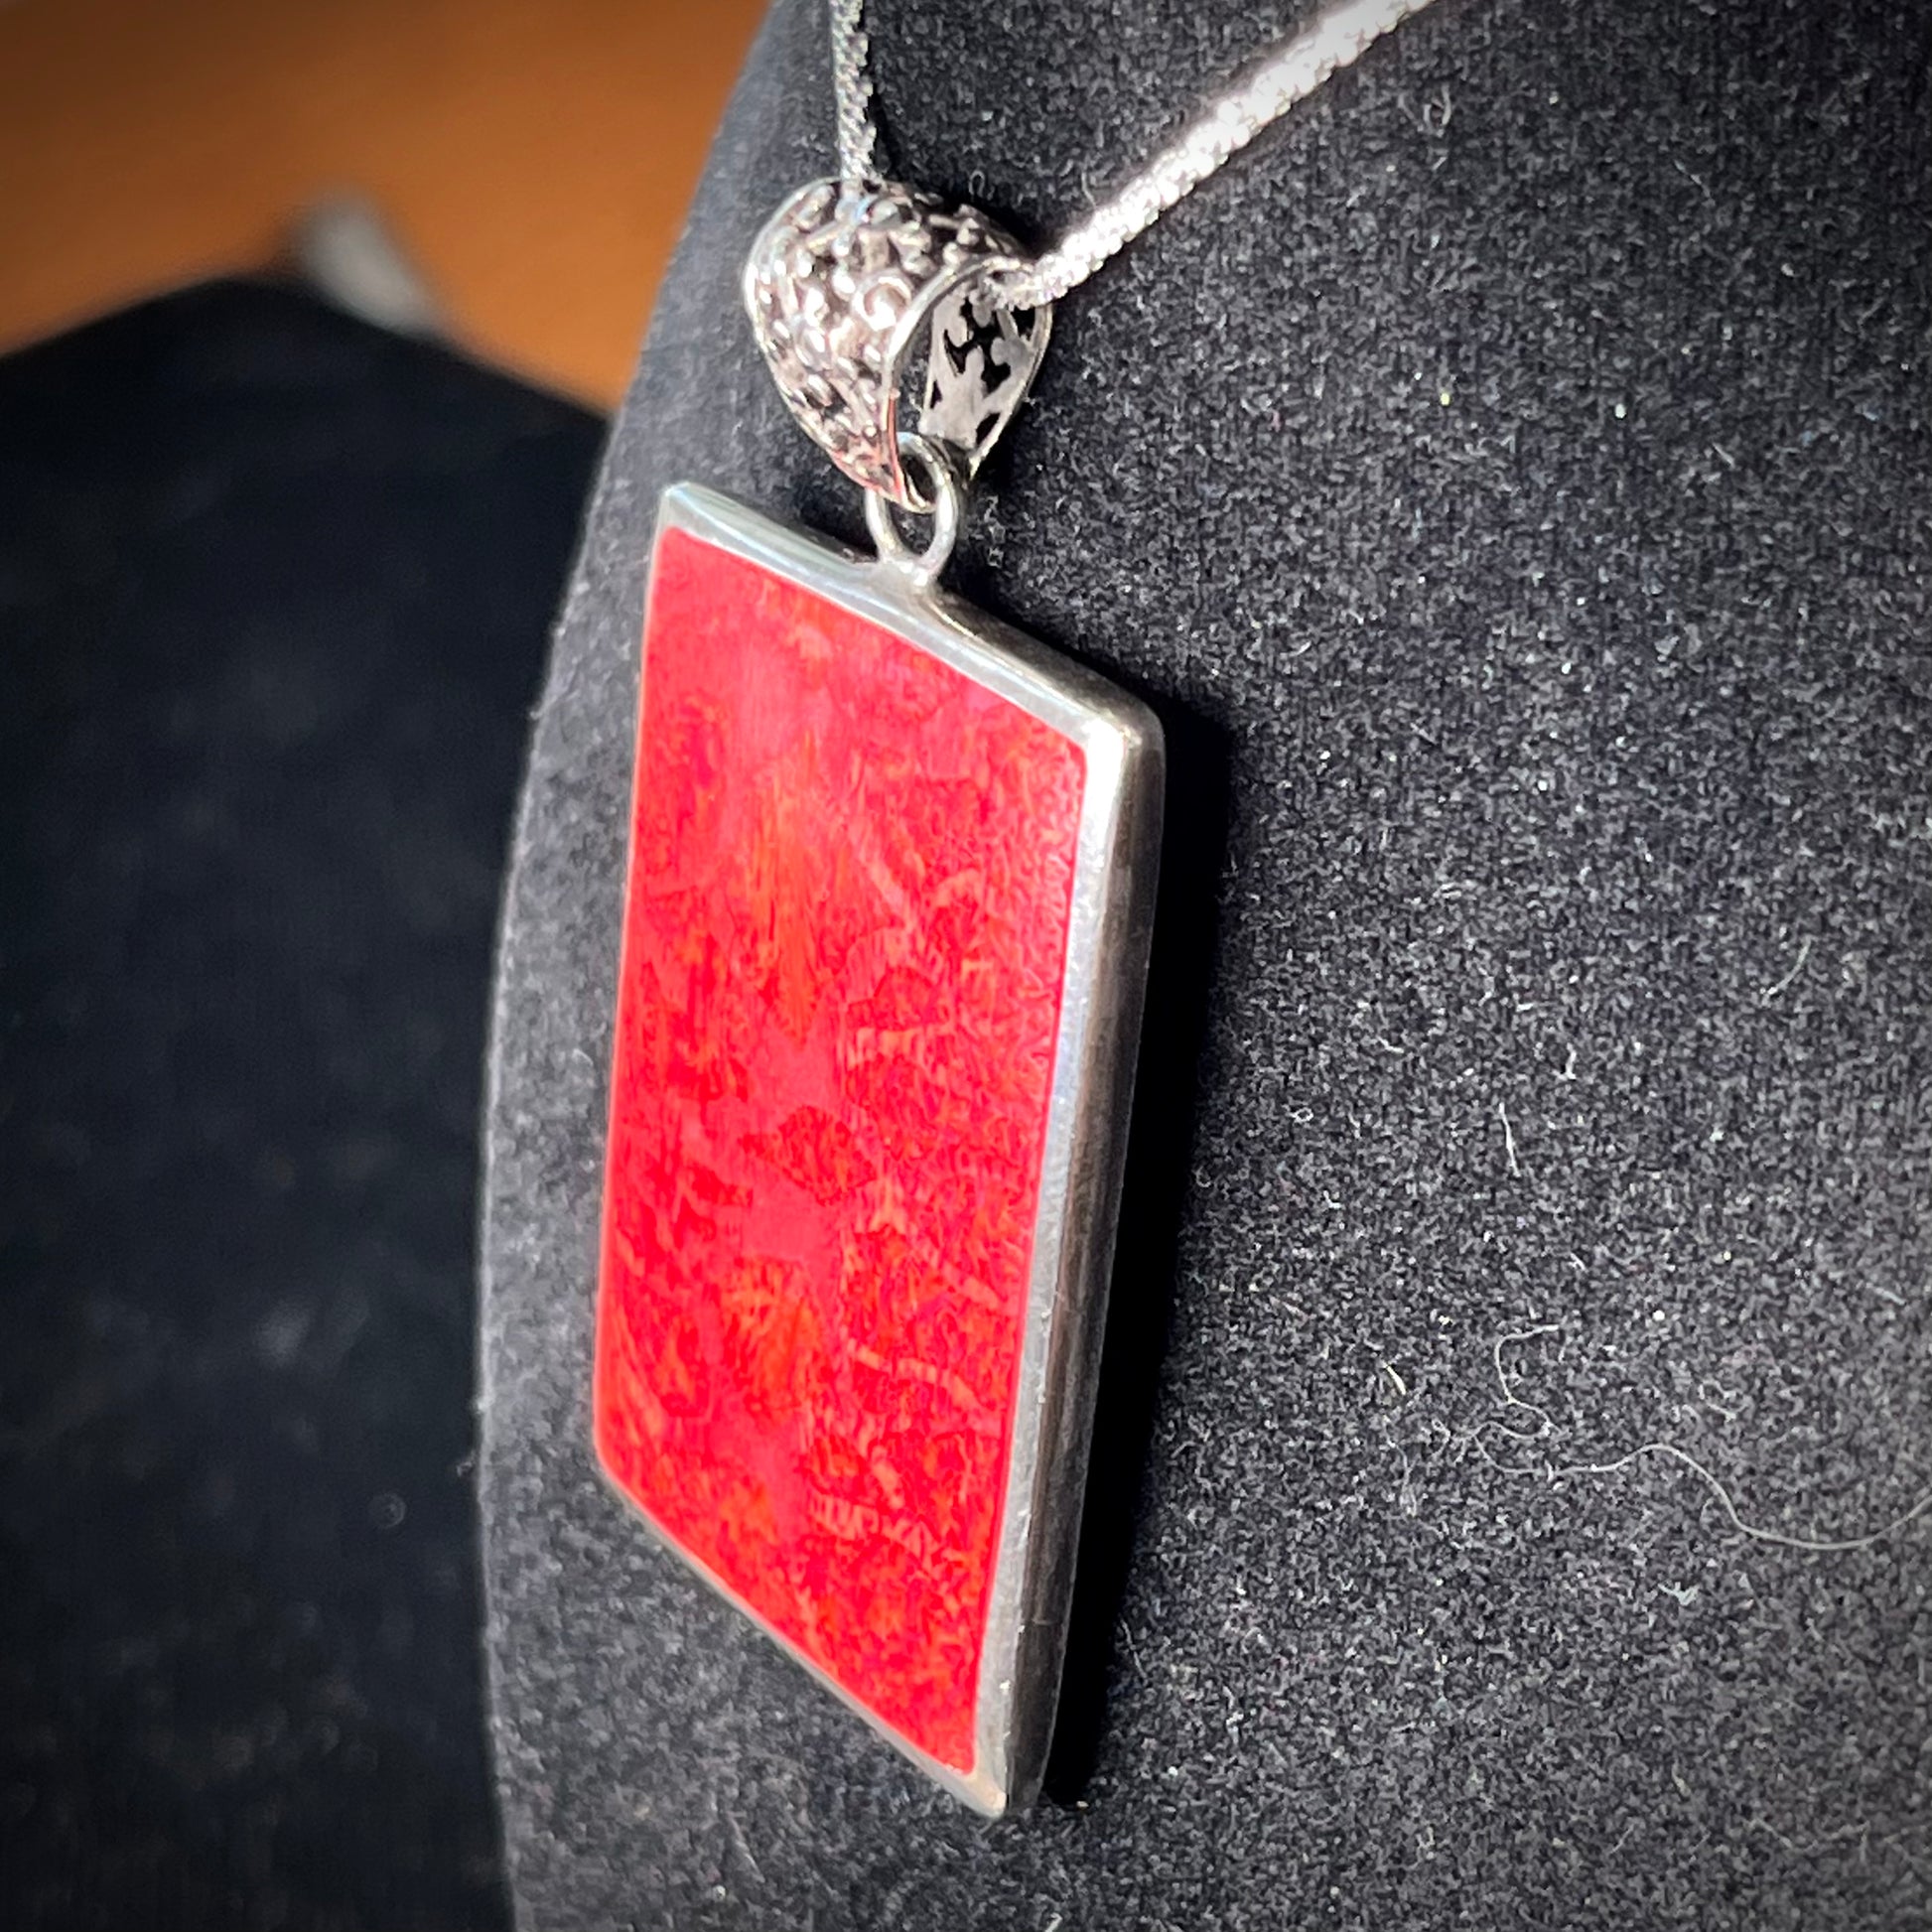 A sterling silver pendant set with rectangular slices of abalone shell and red fossil coral.